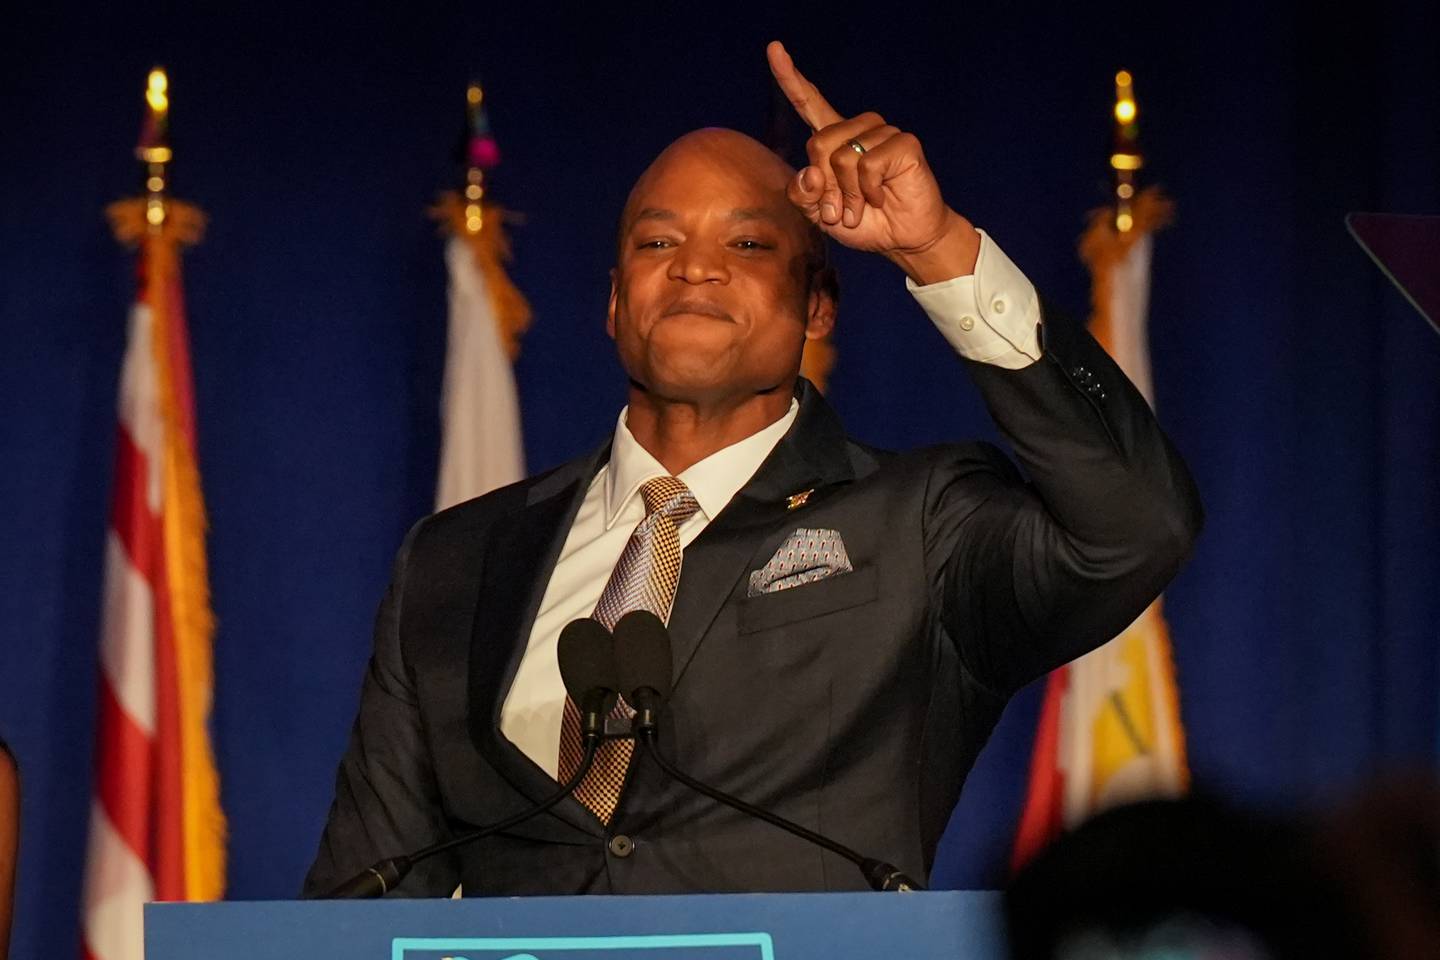 Democratic gubernatorial candidate Wes Moore declares victory at an Election Night event at the Baltimore Marriott Waterfront on Tuesday, November 8. Democratic candidates Wes Moore, Aruna Miller, Chris Van Hollen, Anthony Brown and Brooke Lierman held a combined event beginning at 8 p.m. as the polls closed.